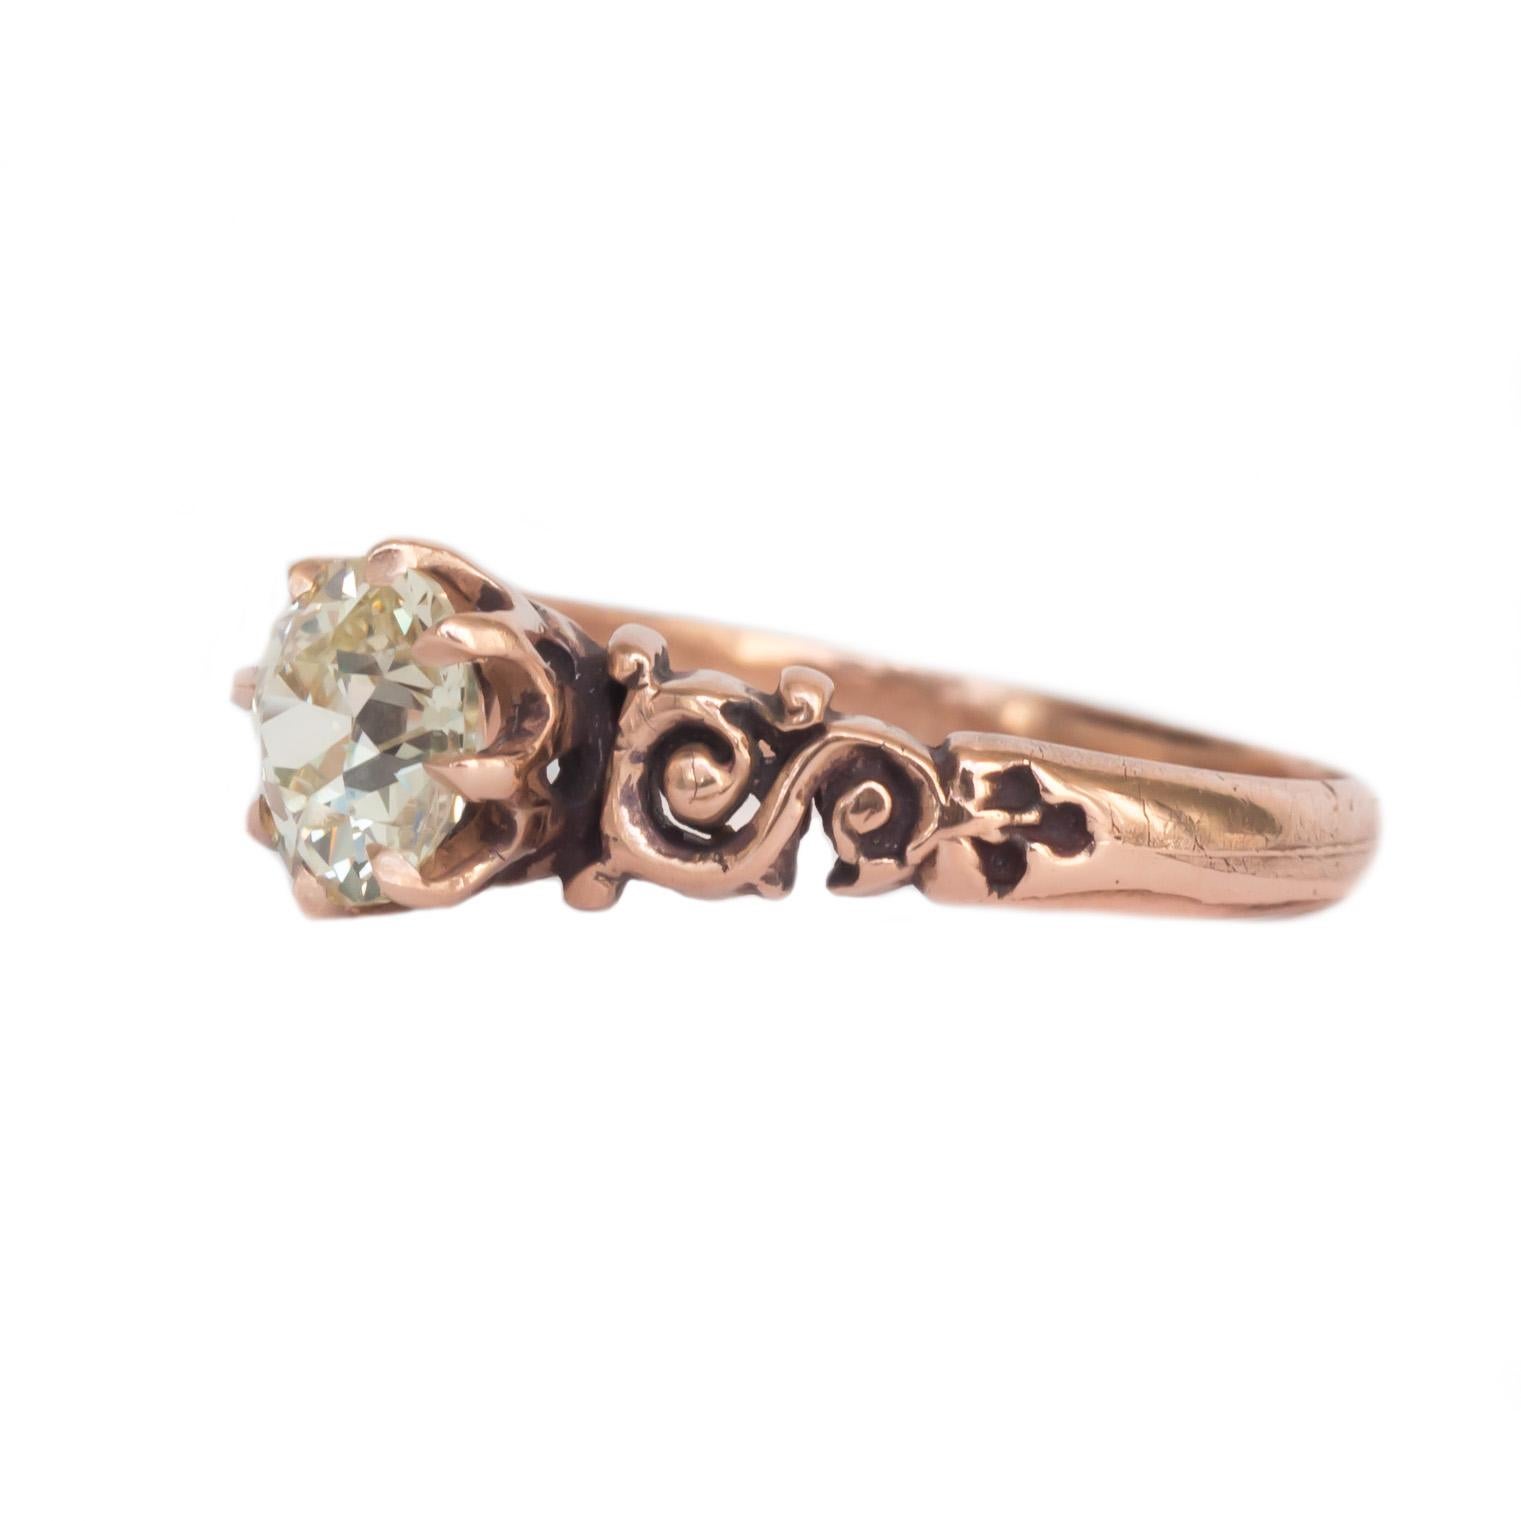 Ring Size: 6.5
Metal Type: 14 karat Rose Gold[Tested]
Weight: 2.5 grams

Center Stone Details:
Weight: 1.06 carat
Cut: Old European Brilliant
Color: Light Yellow [Q-R Color]
Clarity: VS1

Finger to Top of Stone Measurement: 5.75mm
Condition: 